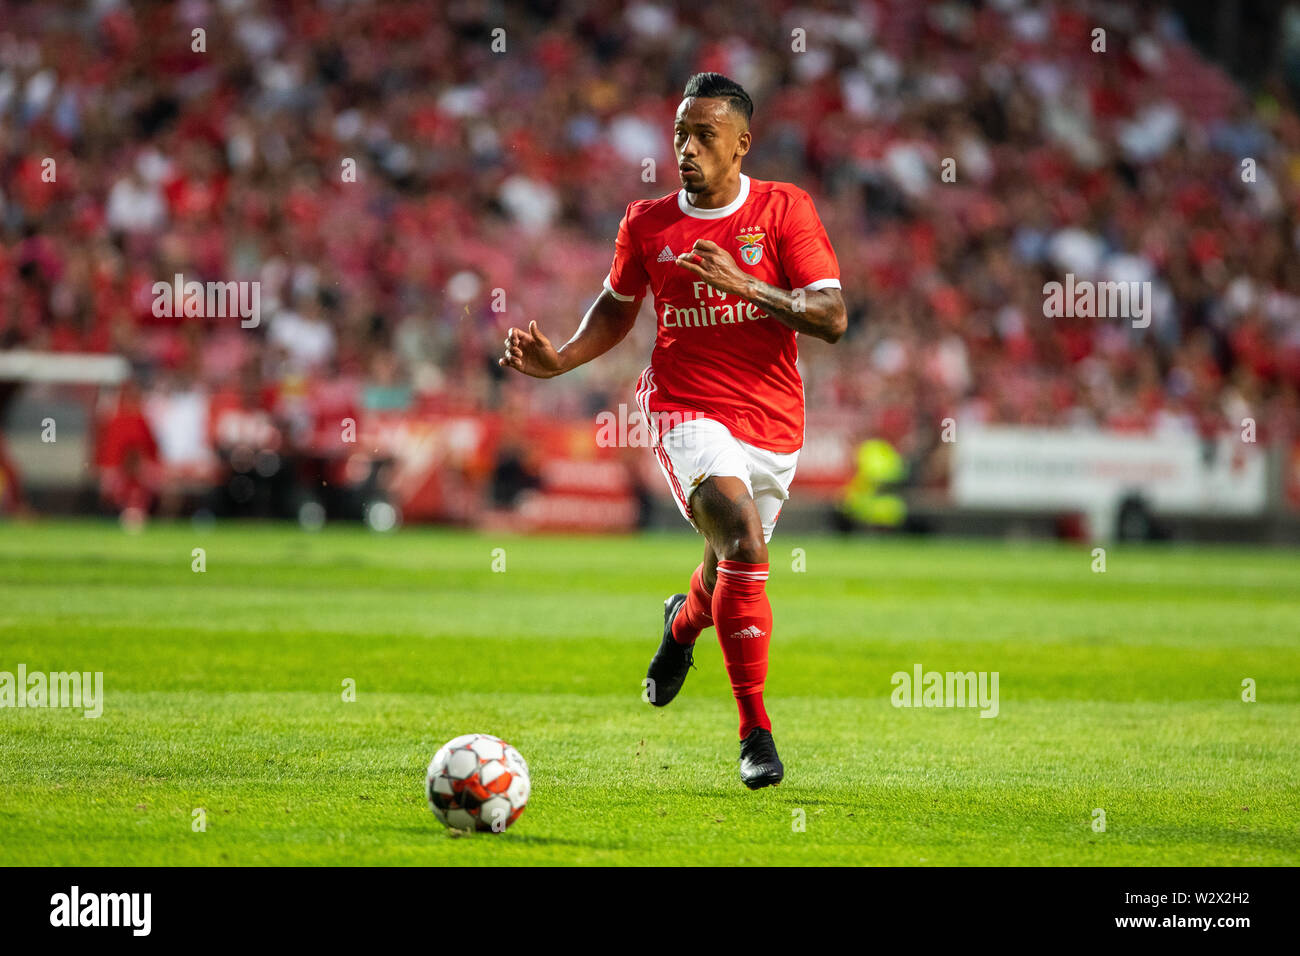 Lisbon, Portugal. 10th July, 2019. Caio Lucas of SL Benfica in action during the Pre-Season football match 2019/2020 between SL Benfica vs Royal Sporting Club Anderlecht. (Final score: SL Benfica 1 - 2 Royal Sporting Club Anderlecht) Credit: SOPA Images Limited/Alamy Live News Stock Photo